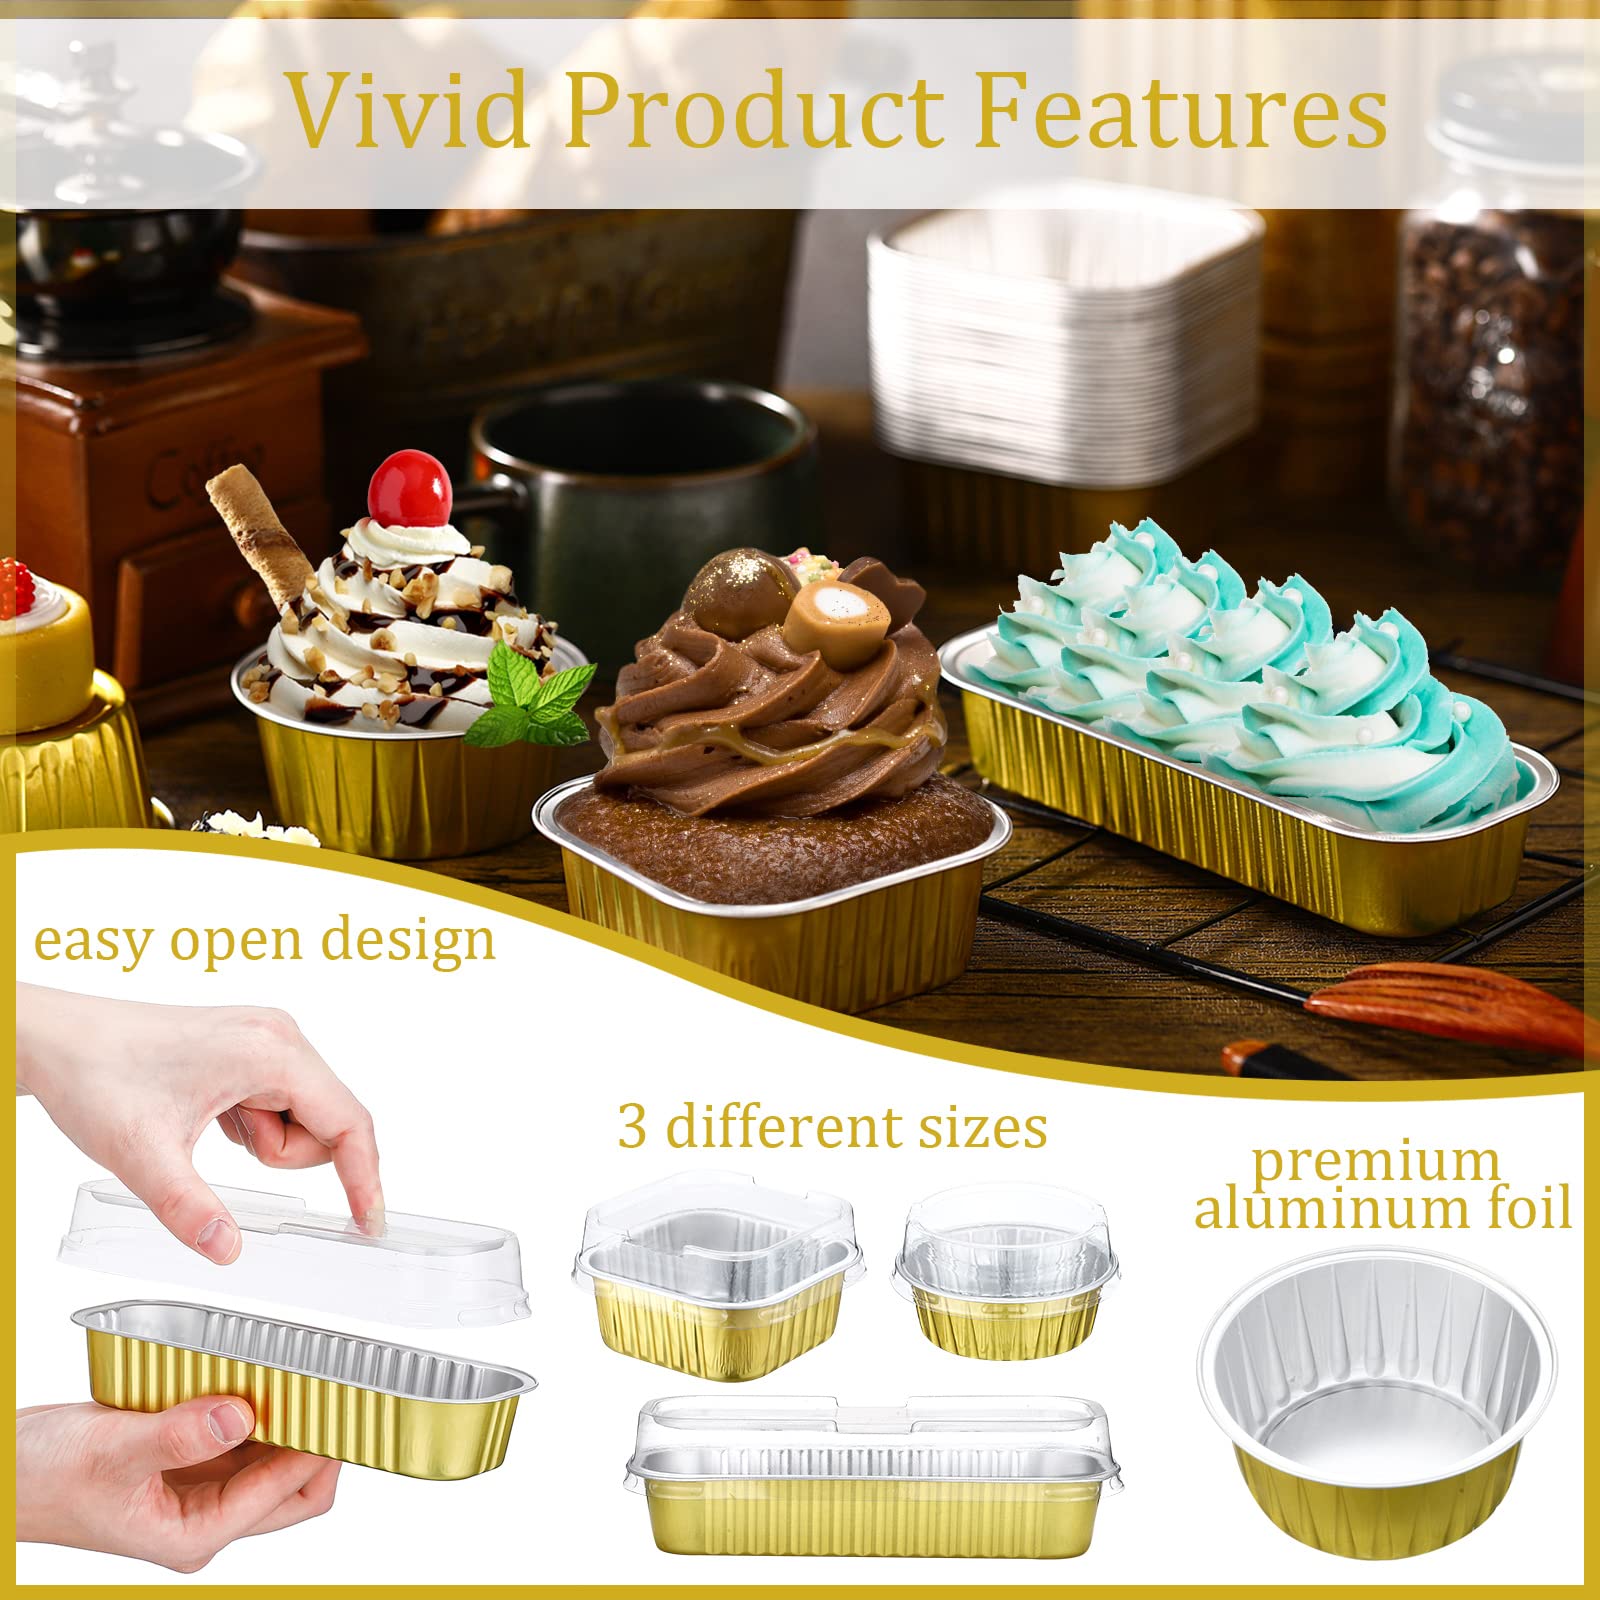 120 Sets 3 Shapes Disposable Mini Aluminum Foil Baking Cups With Lids, 5oz Mini Loaf Pans, 5oz Square Baking Cups, 7oz Muffin Tins, Dessert Cups With Lids for Bread Muffin Brownie Cheesecake